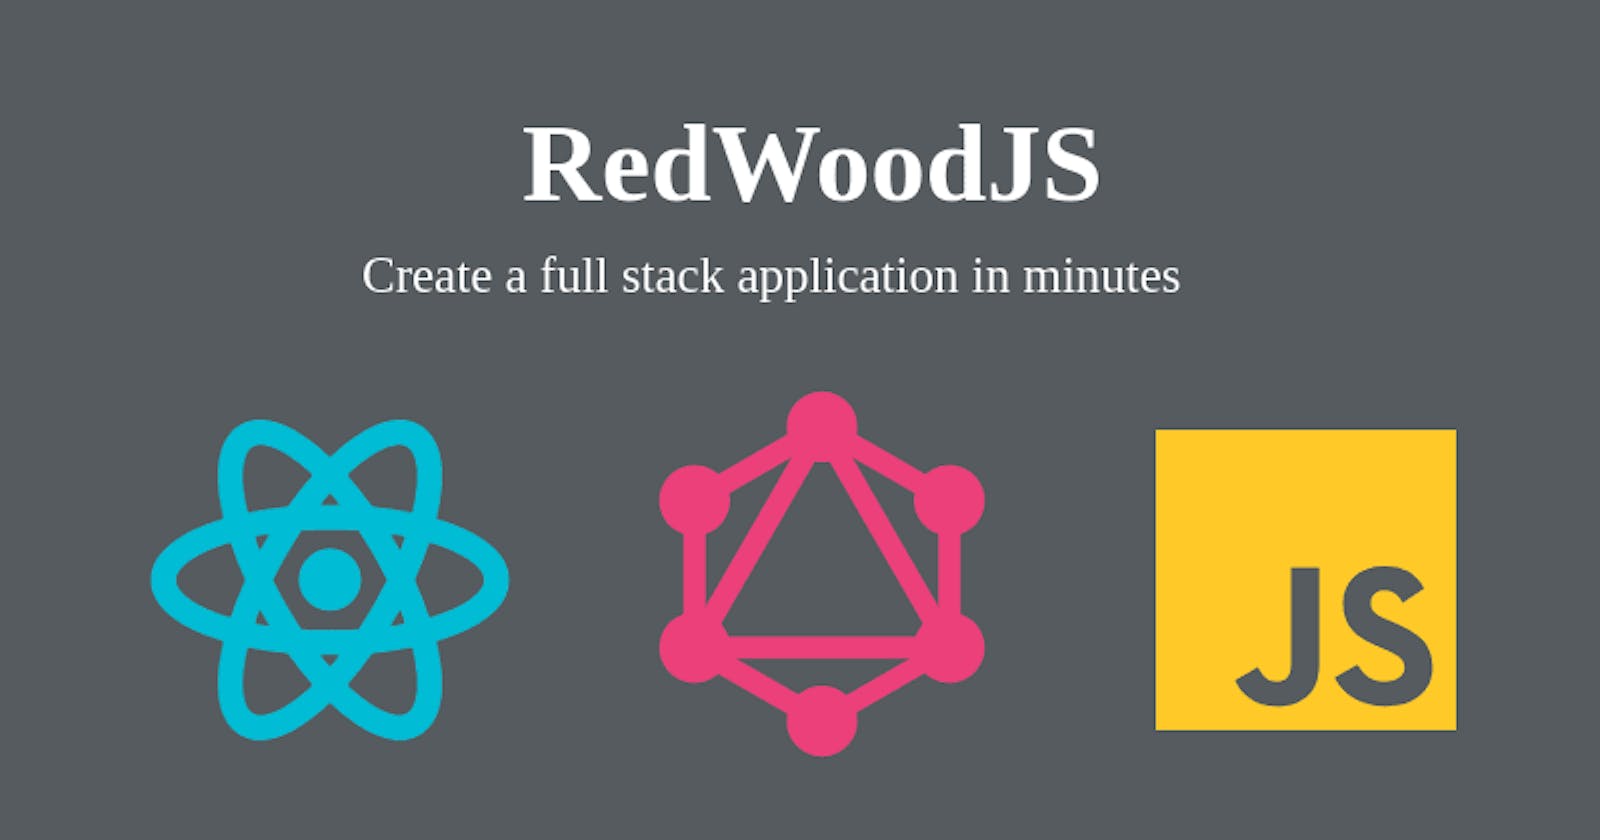 RedwoodJS - Create a full stack application in minutes